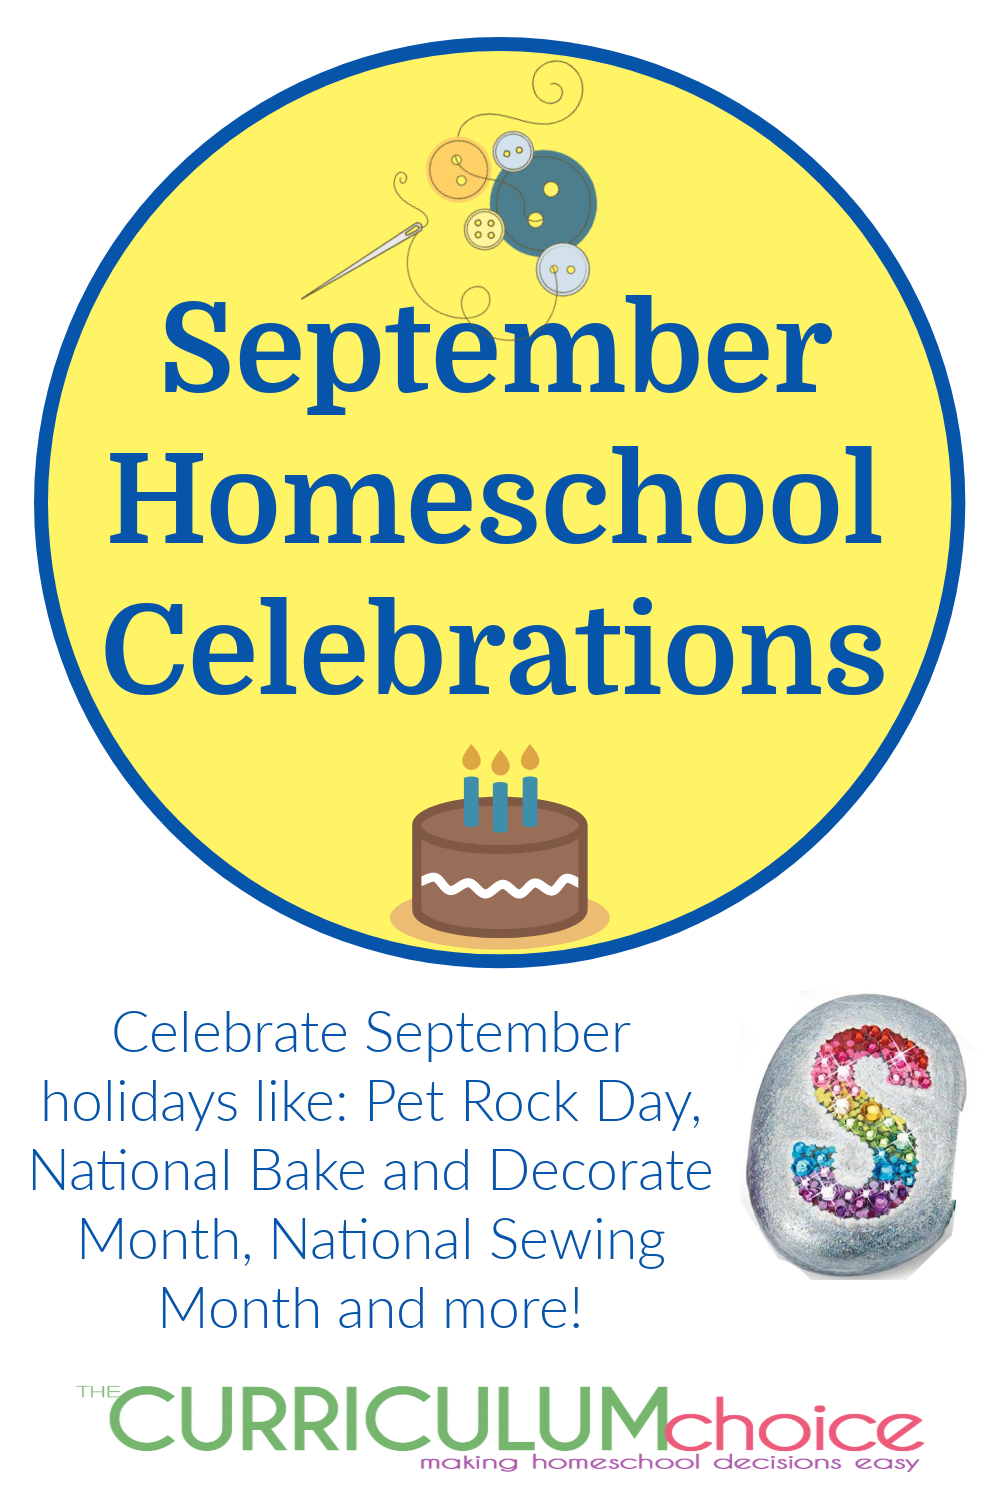 As cooler weather and school roll back in, enjoy fun September homeschool celebrations like Pet Rock Day and National Sewing Month!